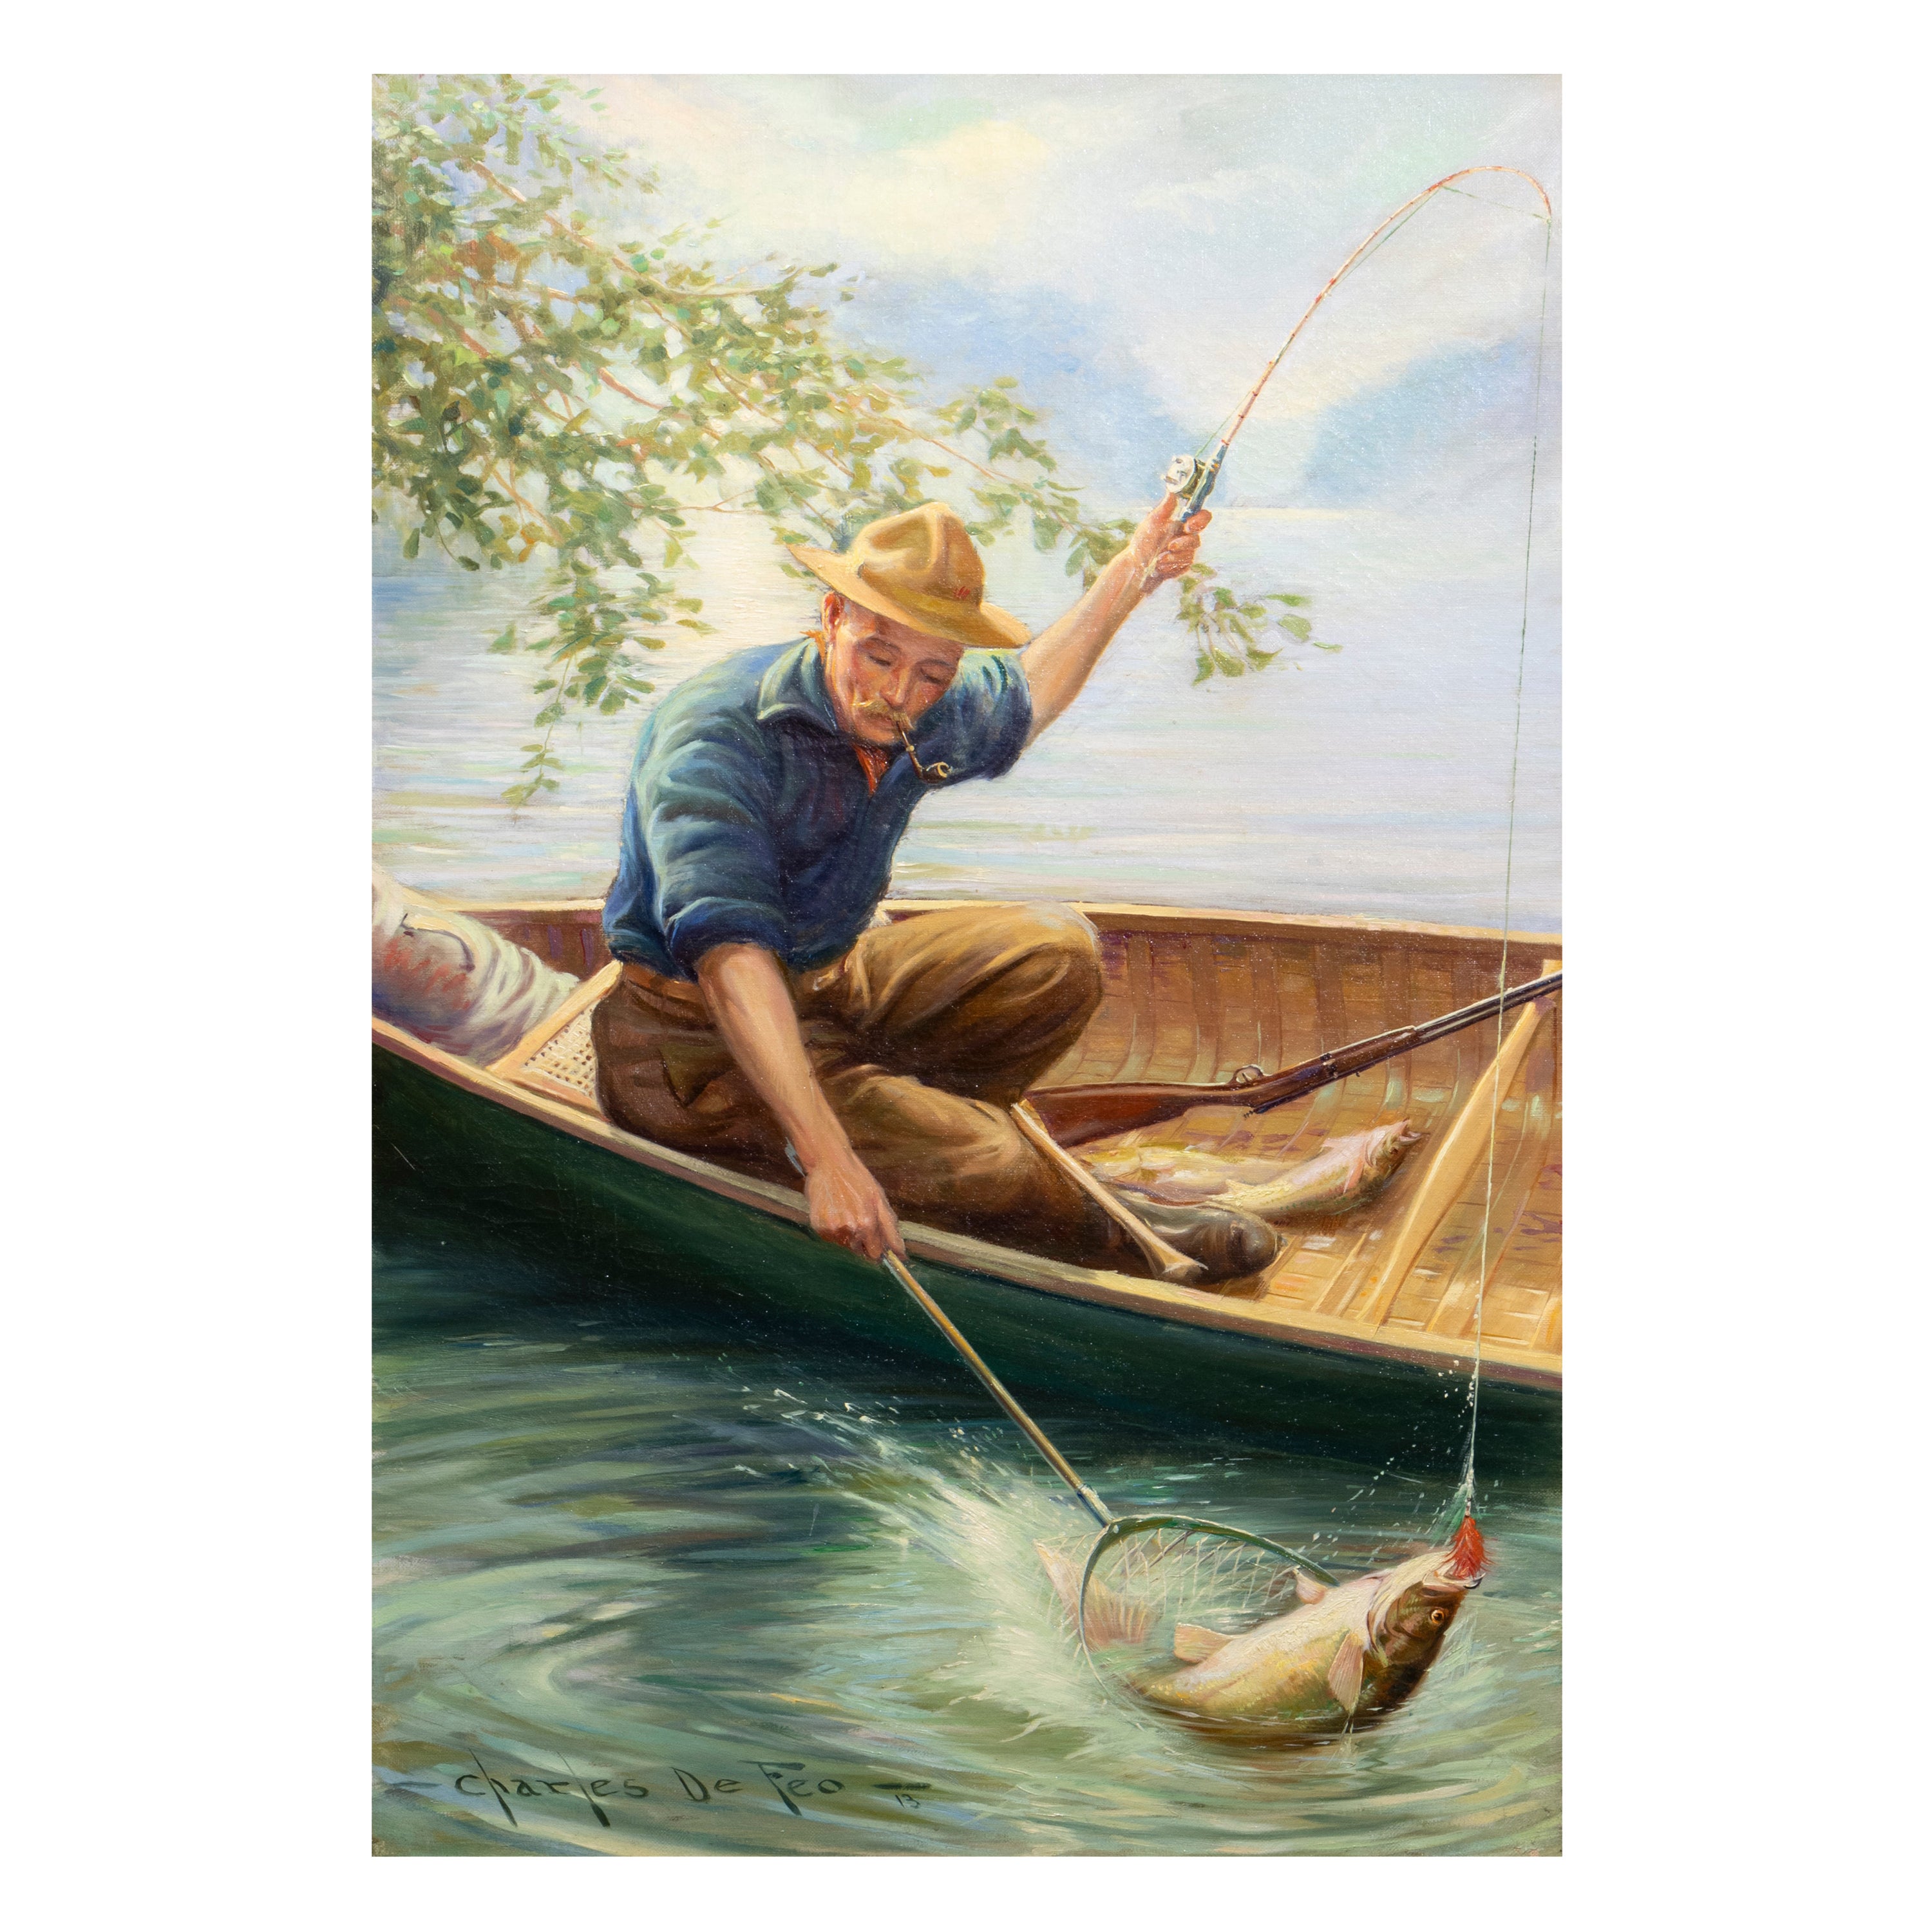 Fisherman's Luck Original Oil Painting by Charles De Feo